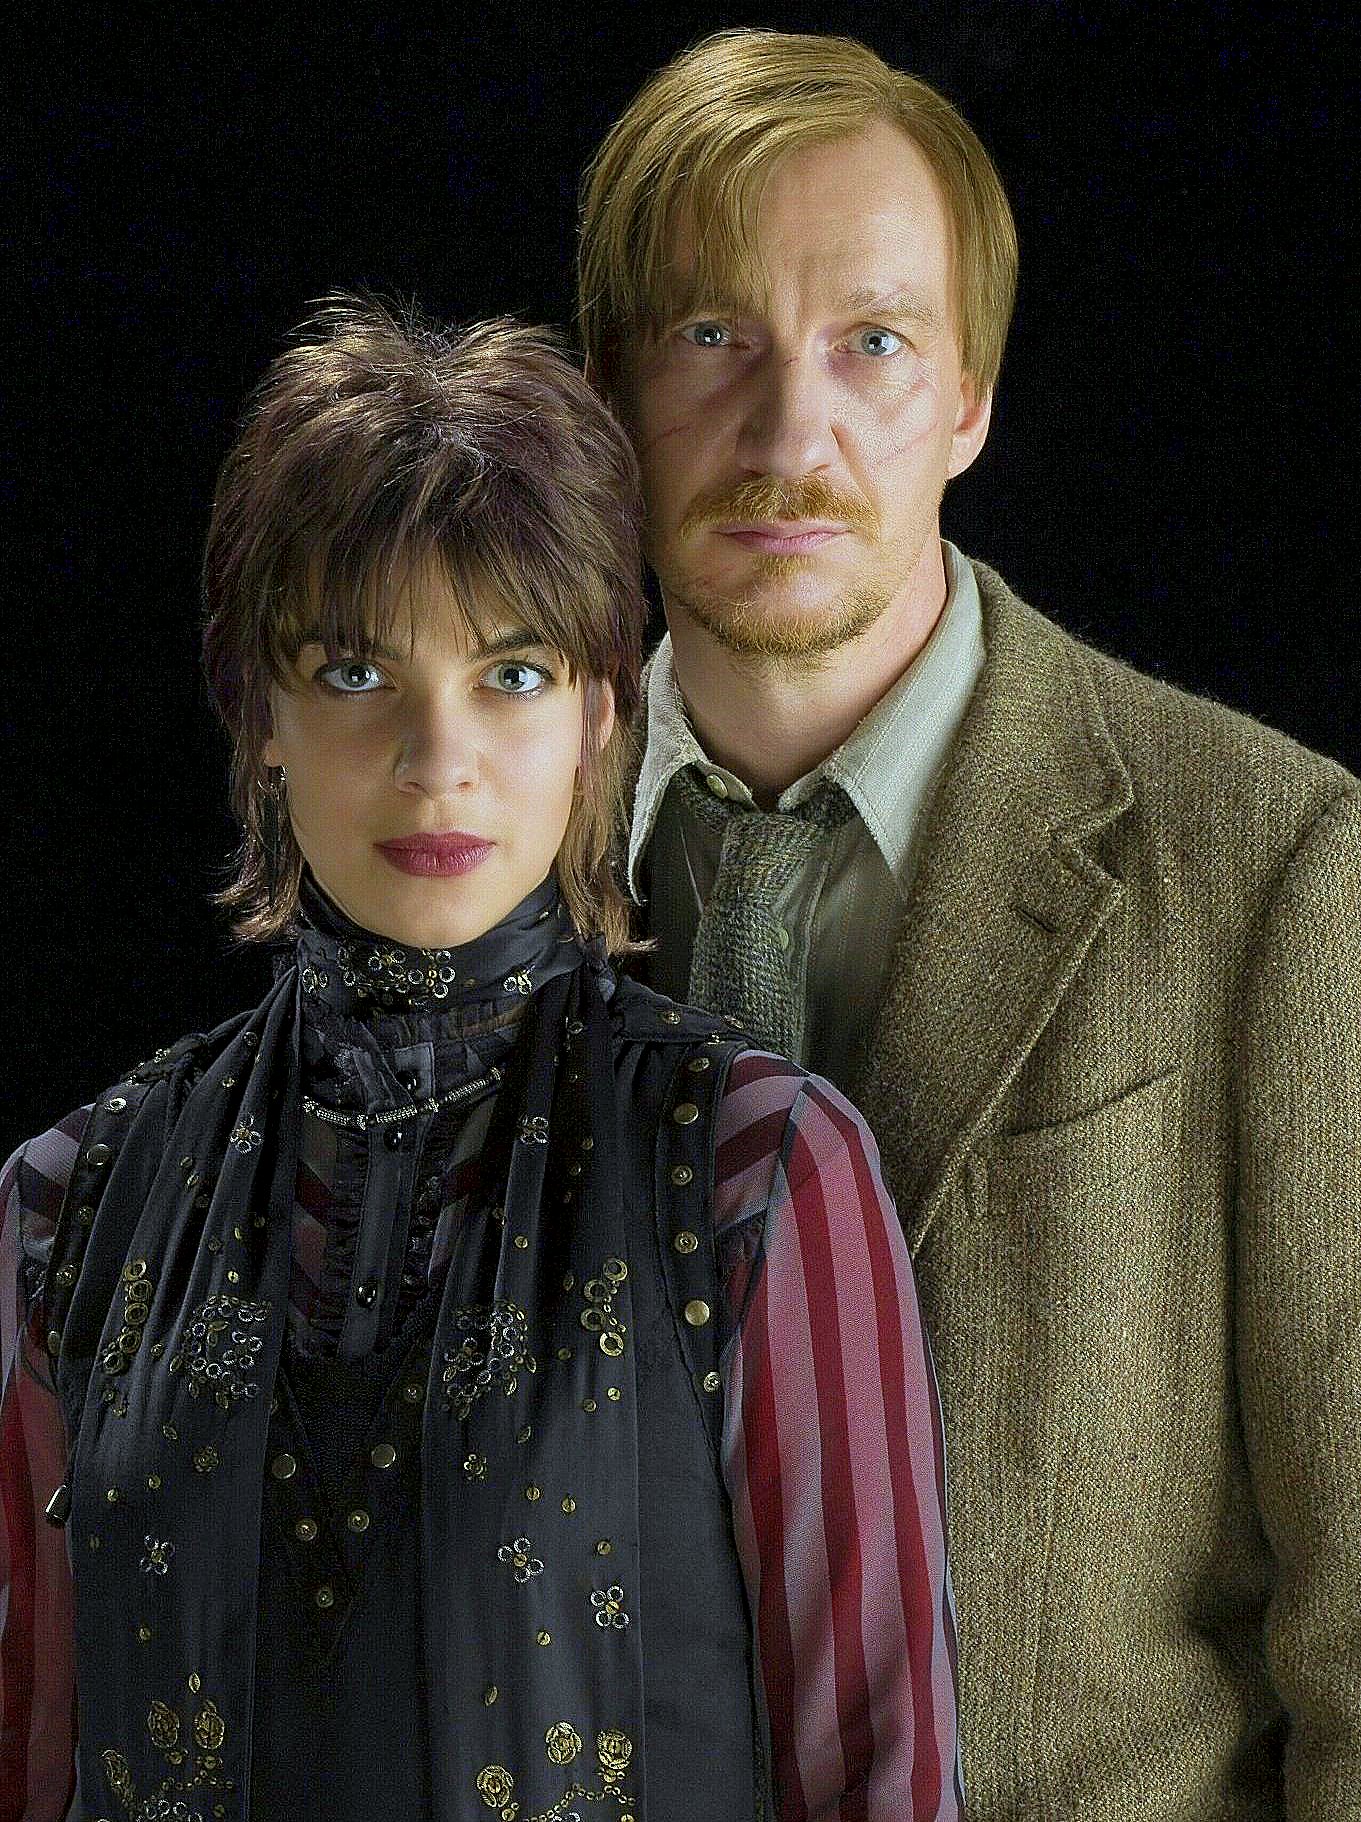 Who played the role of Nymphadora Tonks' father in the Harry Potter films? 2